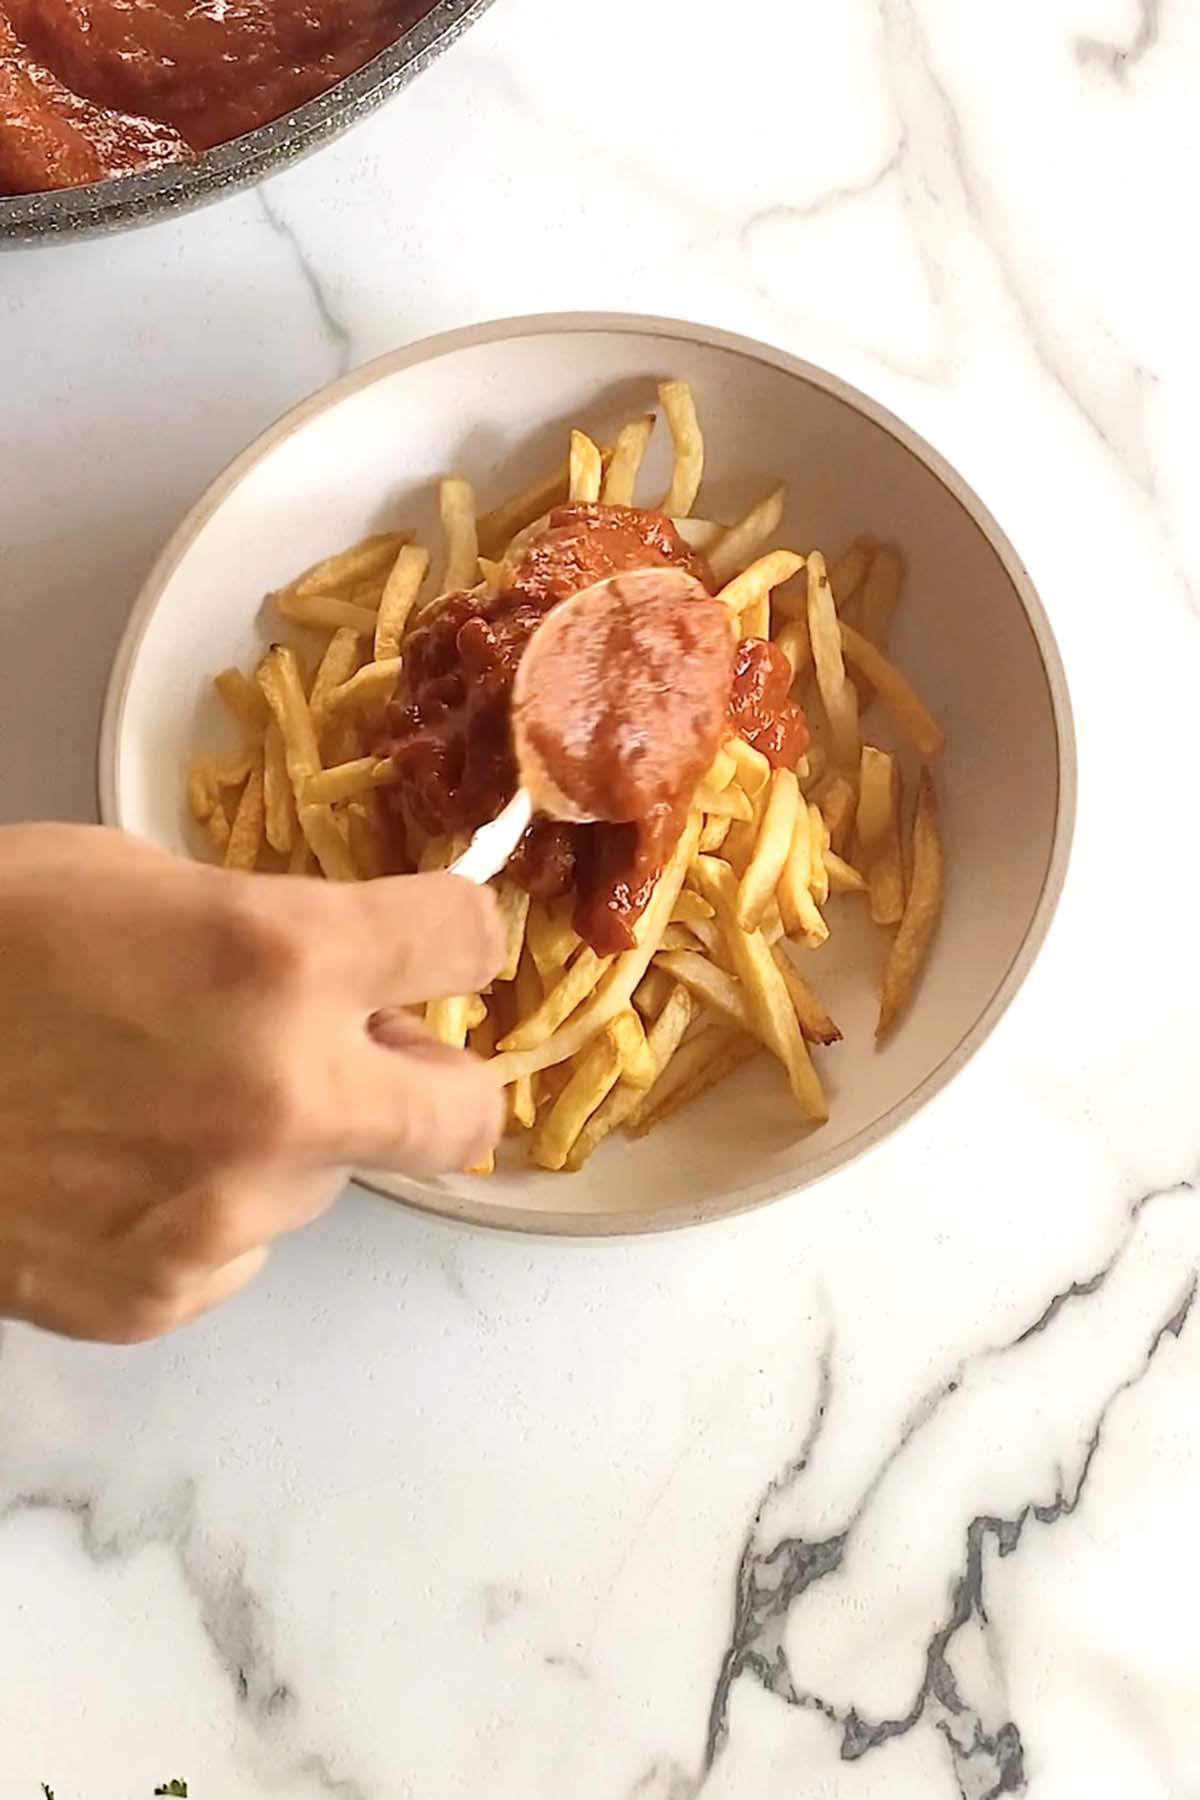 Spooning butter chicken sauce on top of fries.